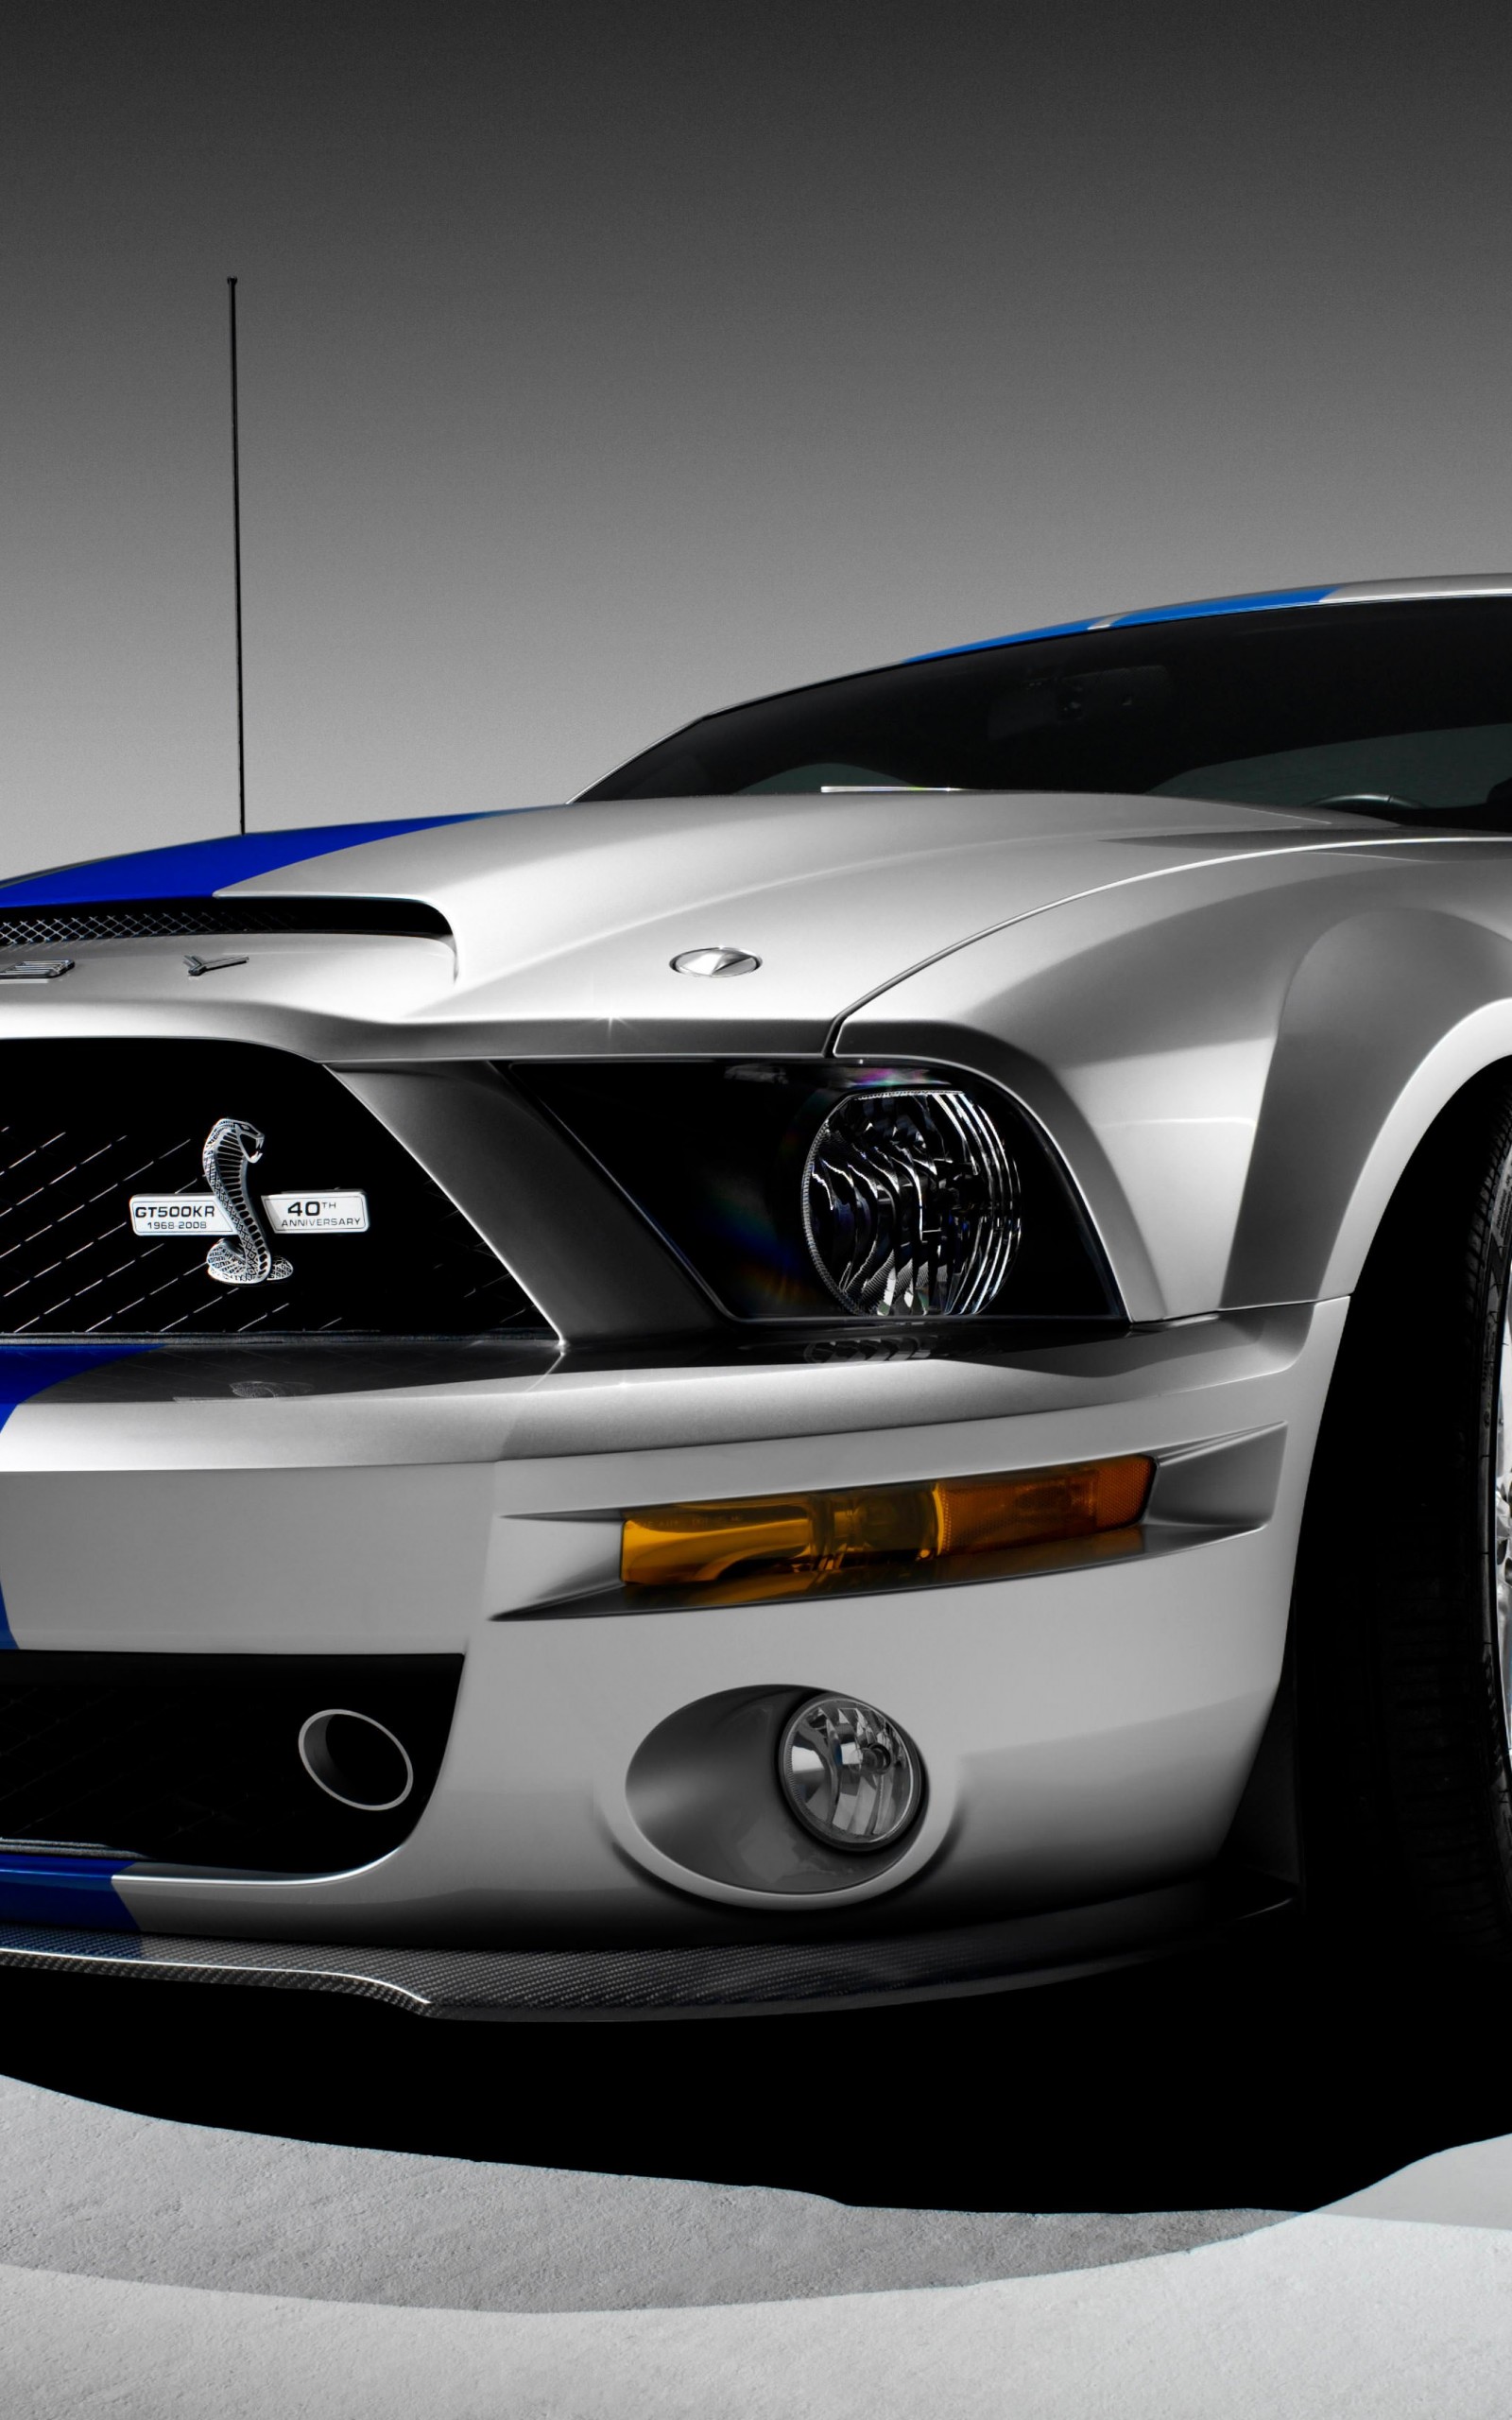 Shelby Mustang GT500KR Wallpaper for Amazon Kindle Fire HDX 8.9